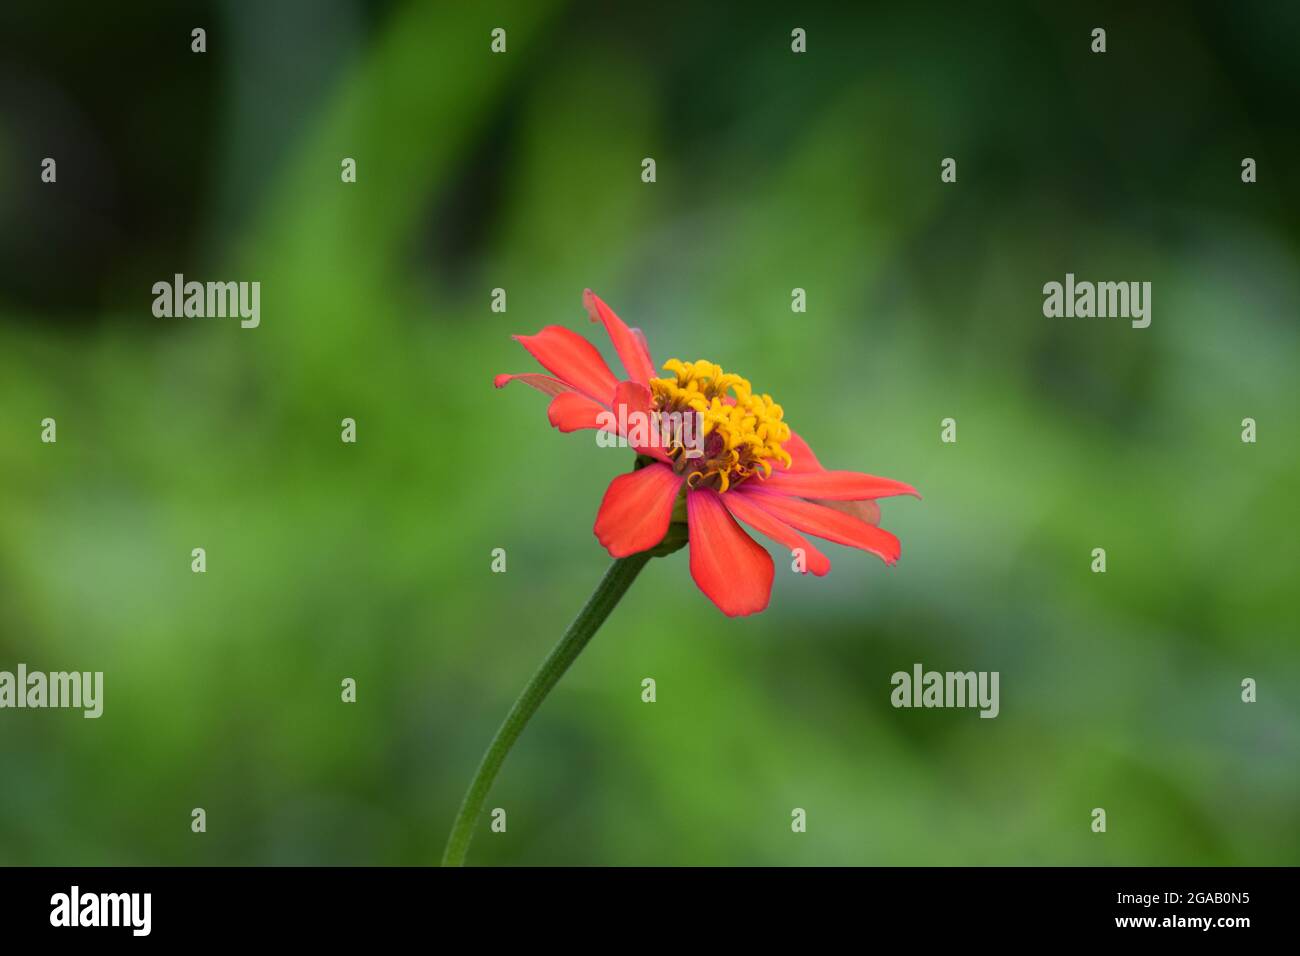 Isolated red and yellow wild flower in blurred background Stock Photo